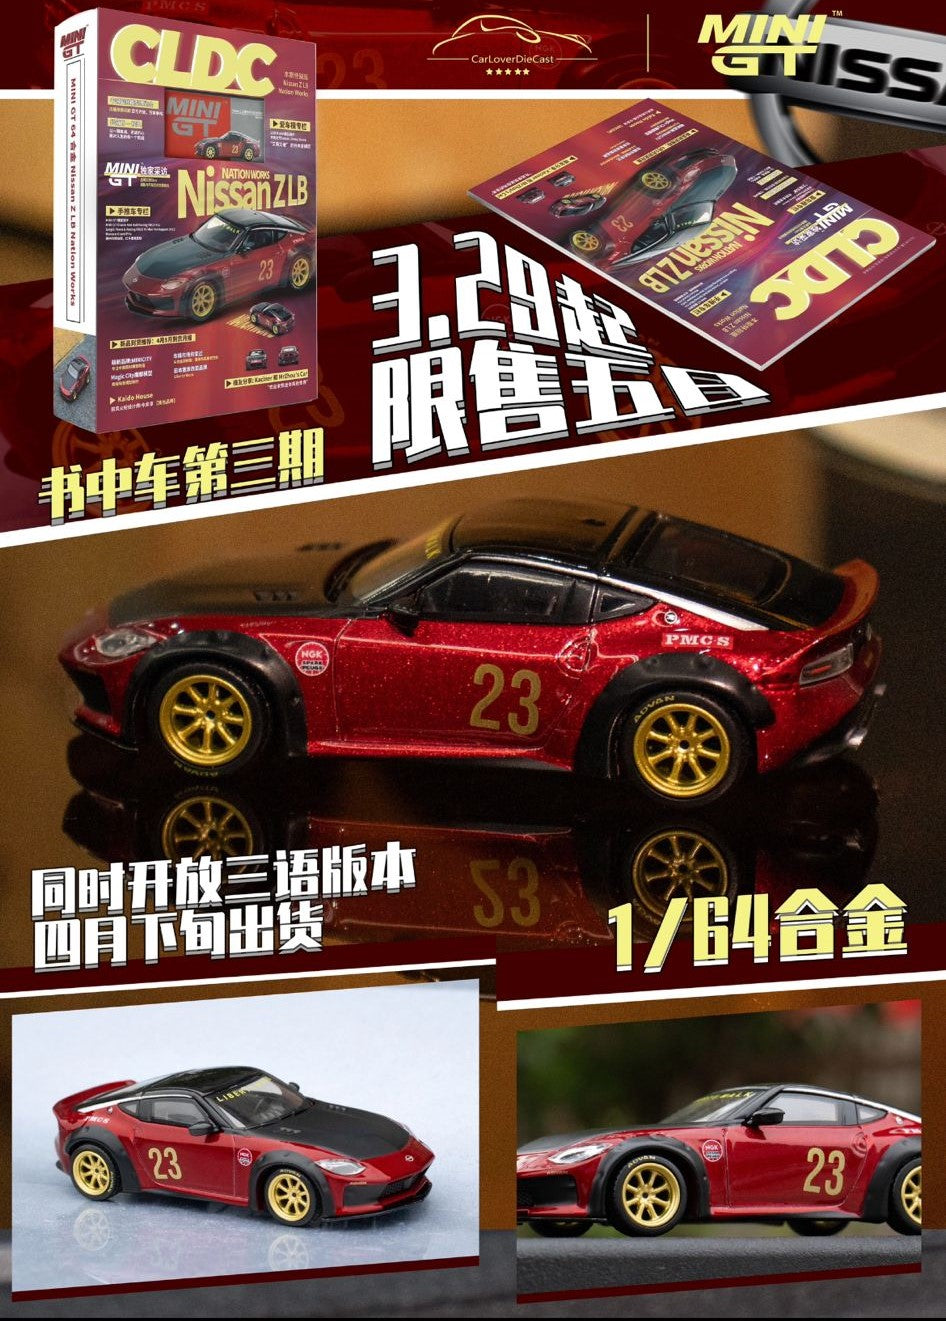 [Preorder] Mini GT 1:64 CLDC Magazine with Nissan Z LB Nation Works – China CLDC Exclusives (Chinese Version)